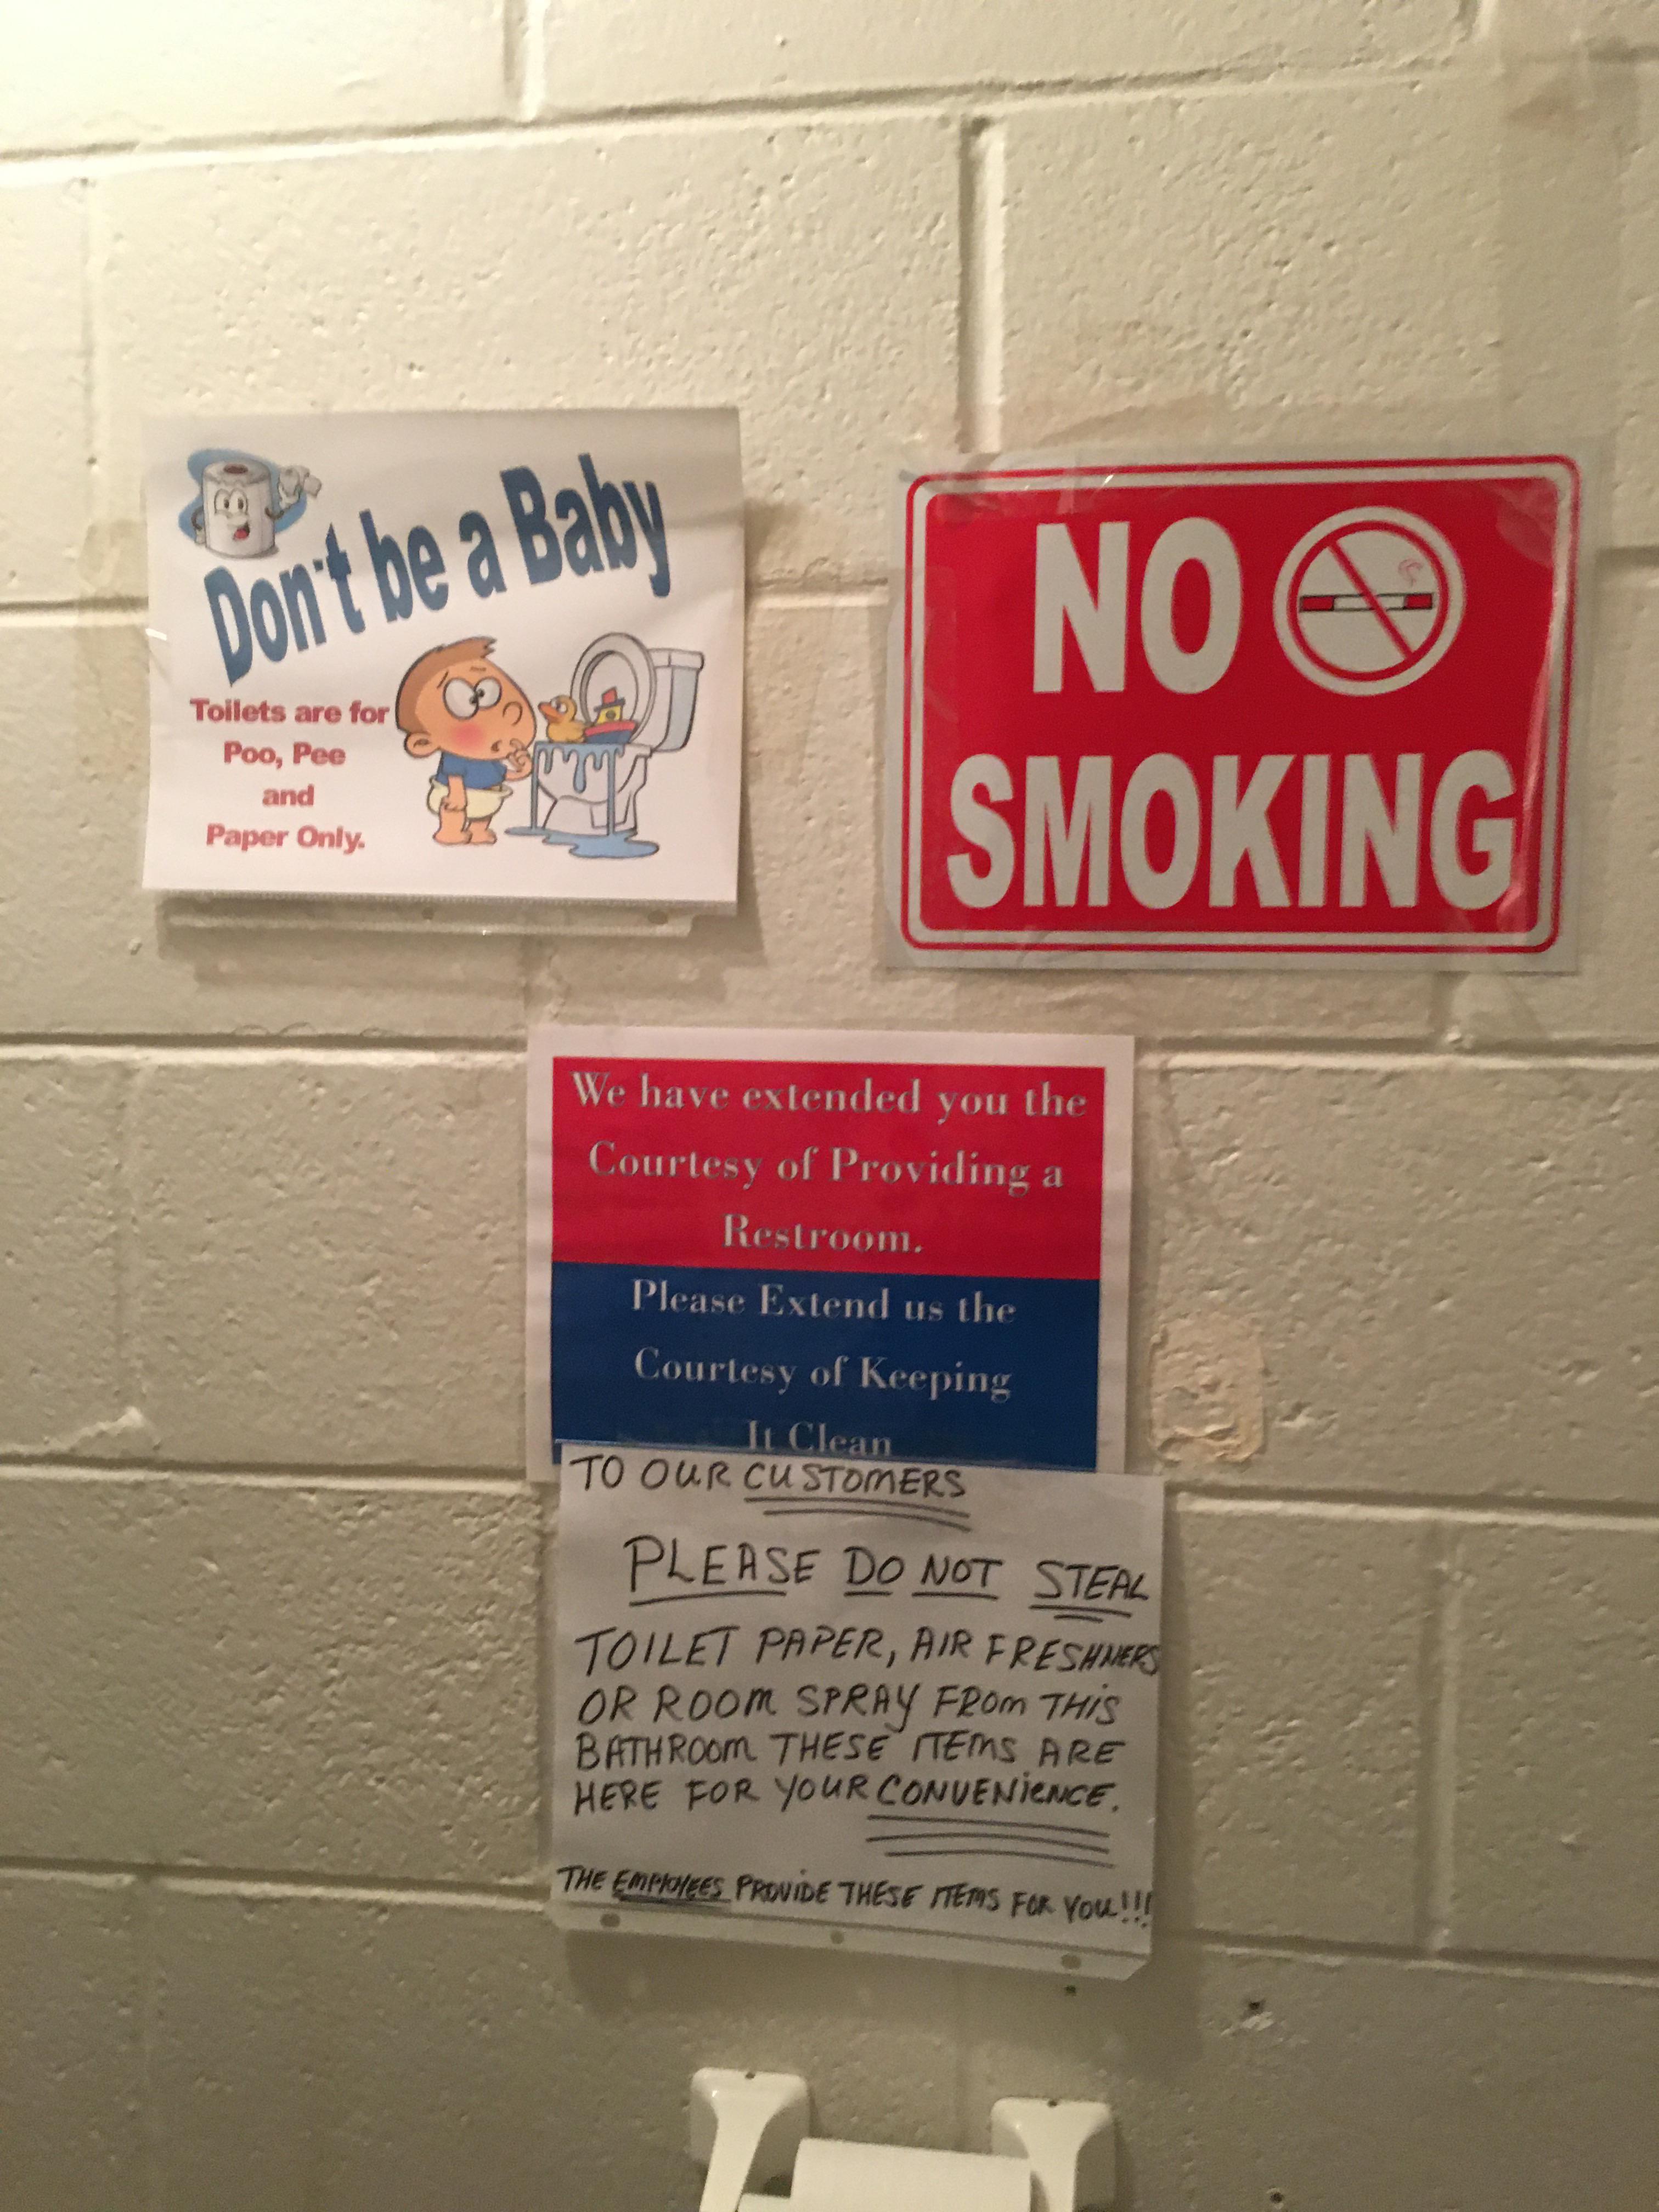 signage - mont be a Baby Don Tols are for No Smoking We have remedy the Cartesy of Peringa I're all the Courtesy of hering To Our Customers Please Do Not Ster Toilet Paper, Par Fpesp Or Roor Spray FPow The Bathroom These Tems Are Here For Your Convenience